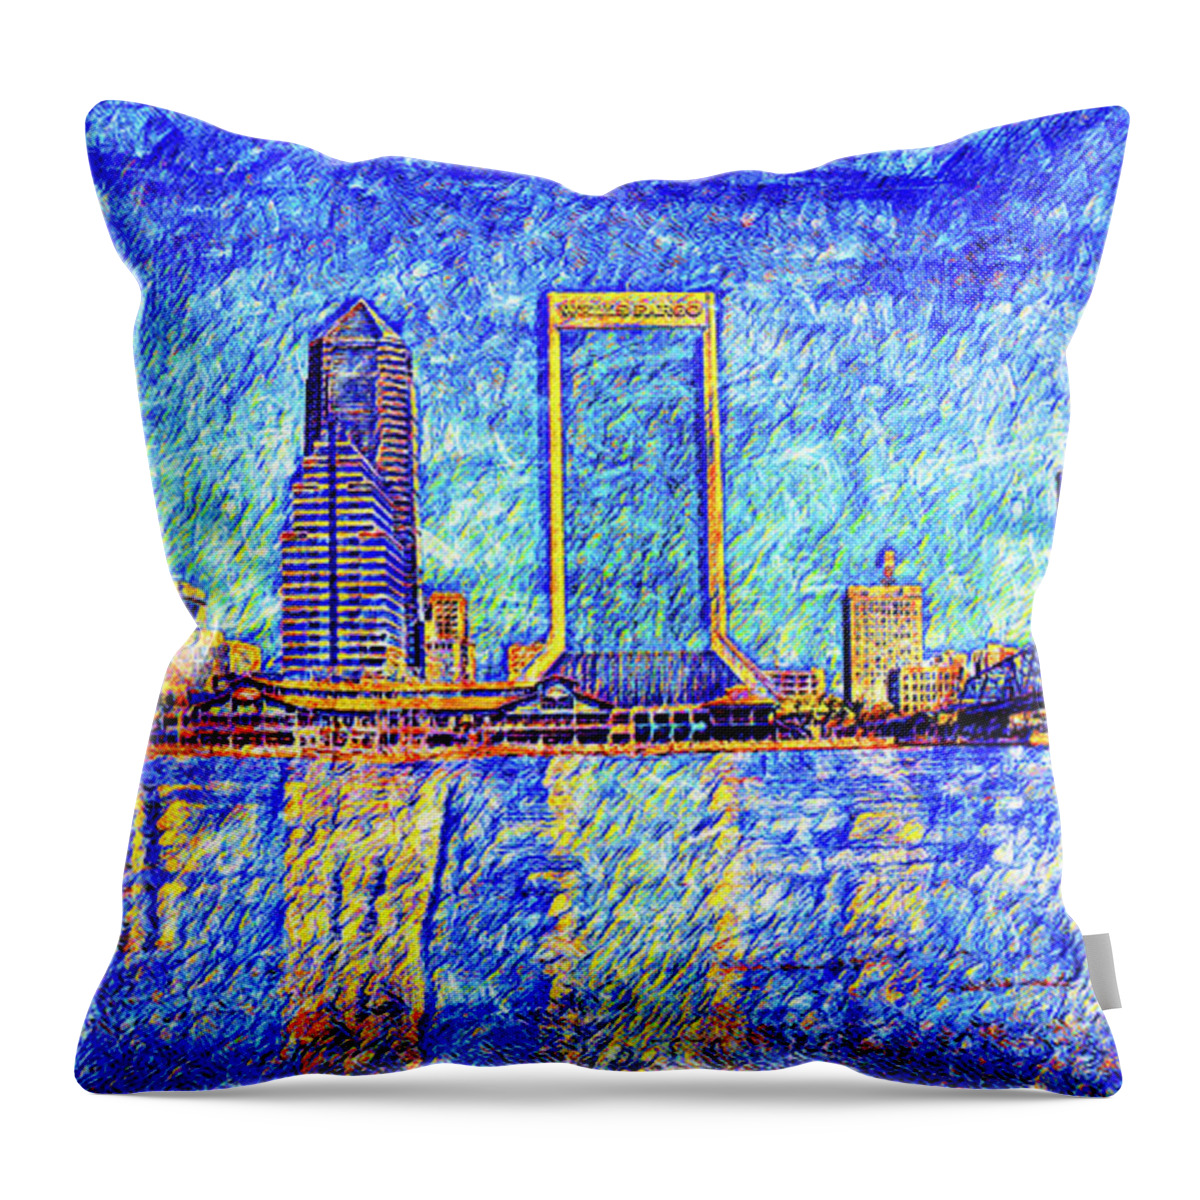 Downtown Jacksonville Throw Pillow featuring the digital art The waterfront of downtown Jacksonville, Florida - digital painting by Nicko Prints